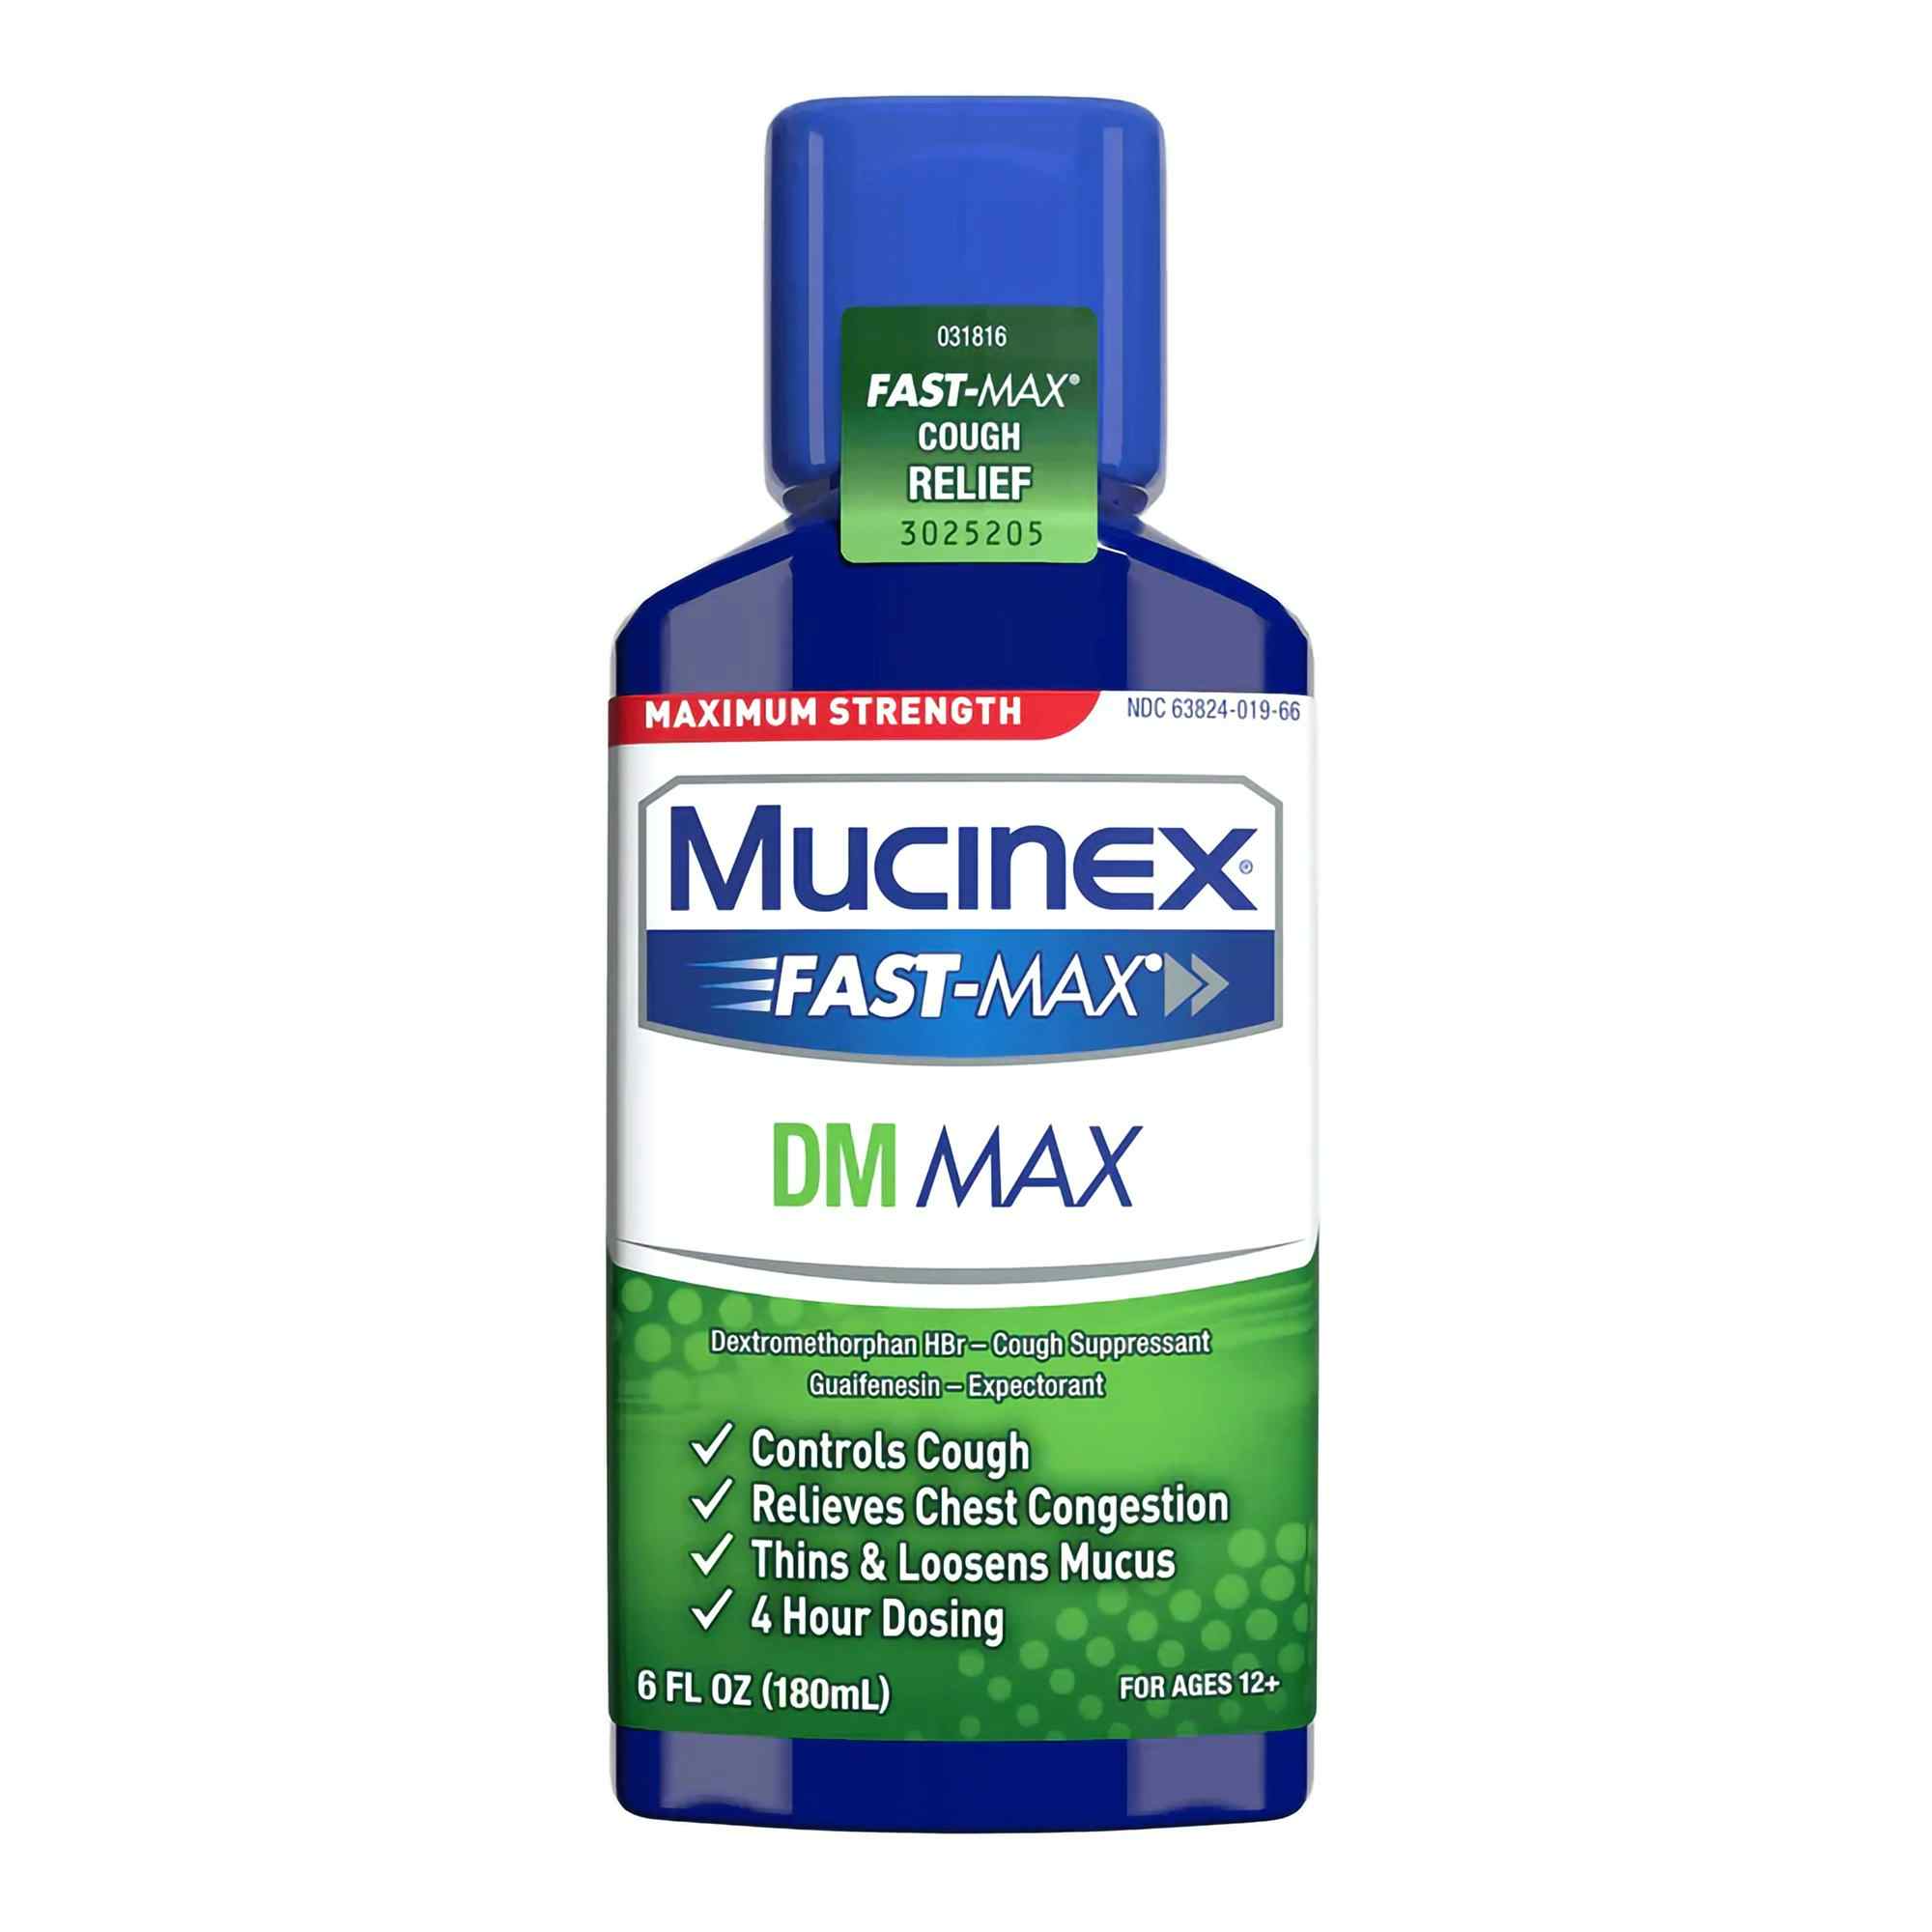 Mucinex Fast-Max DM Max Cold and Cough Relief